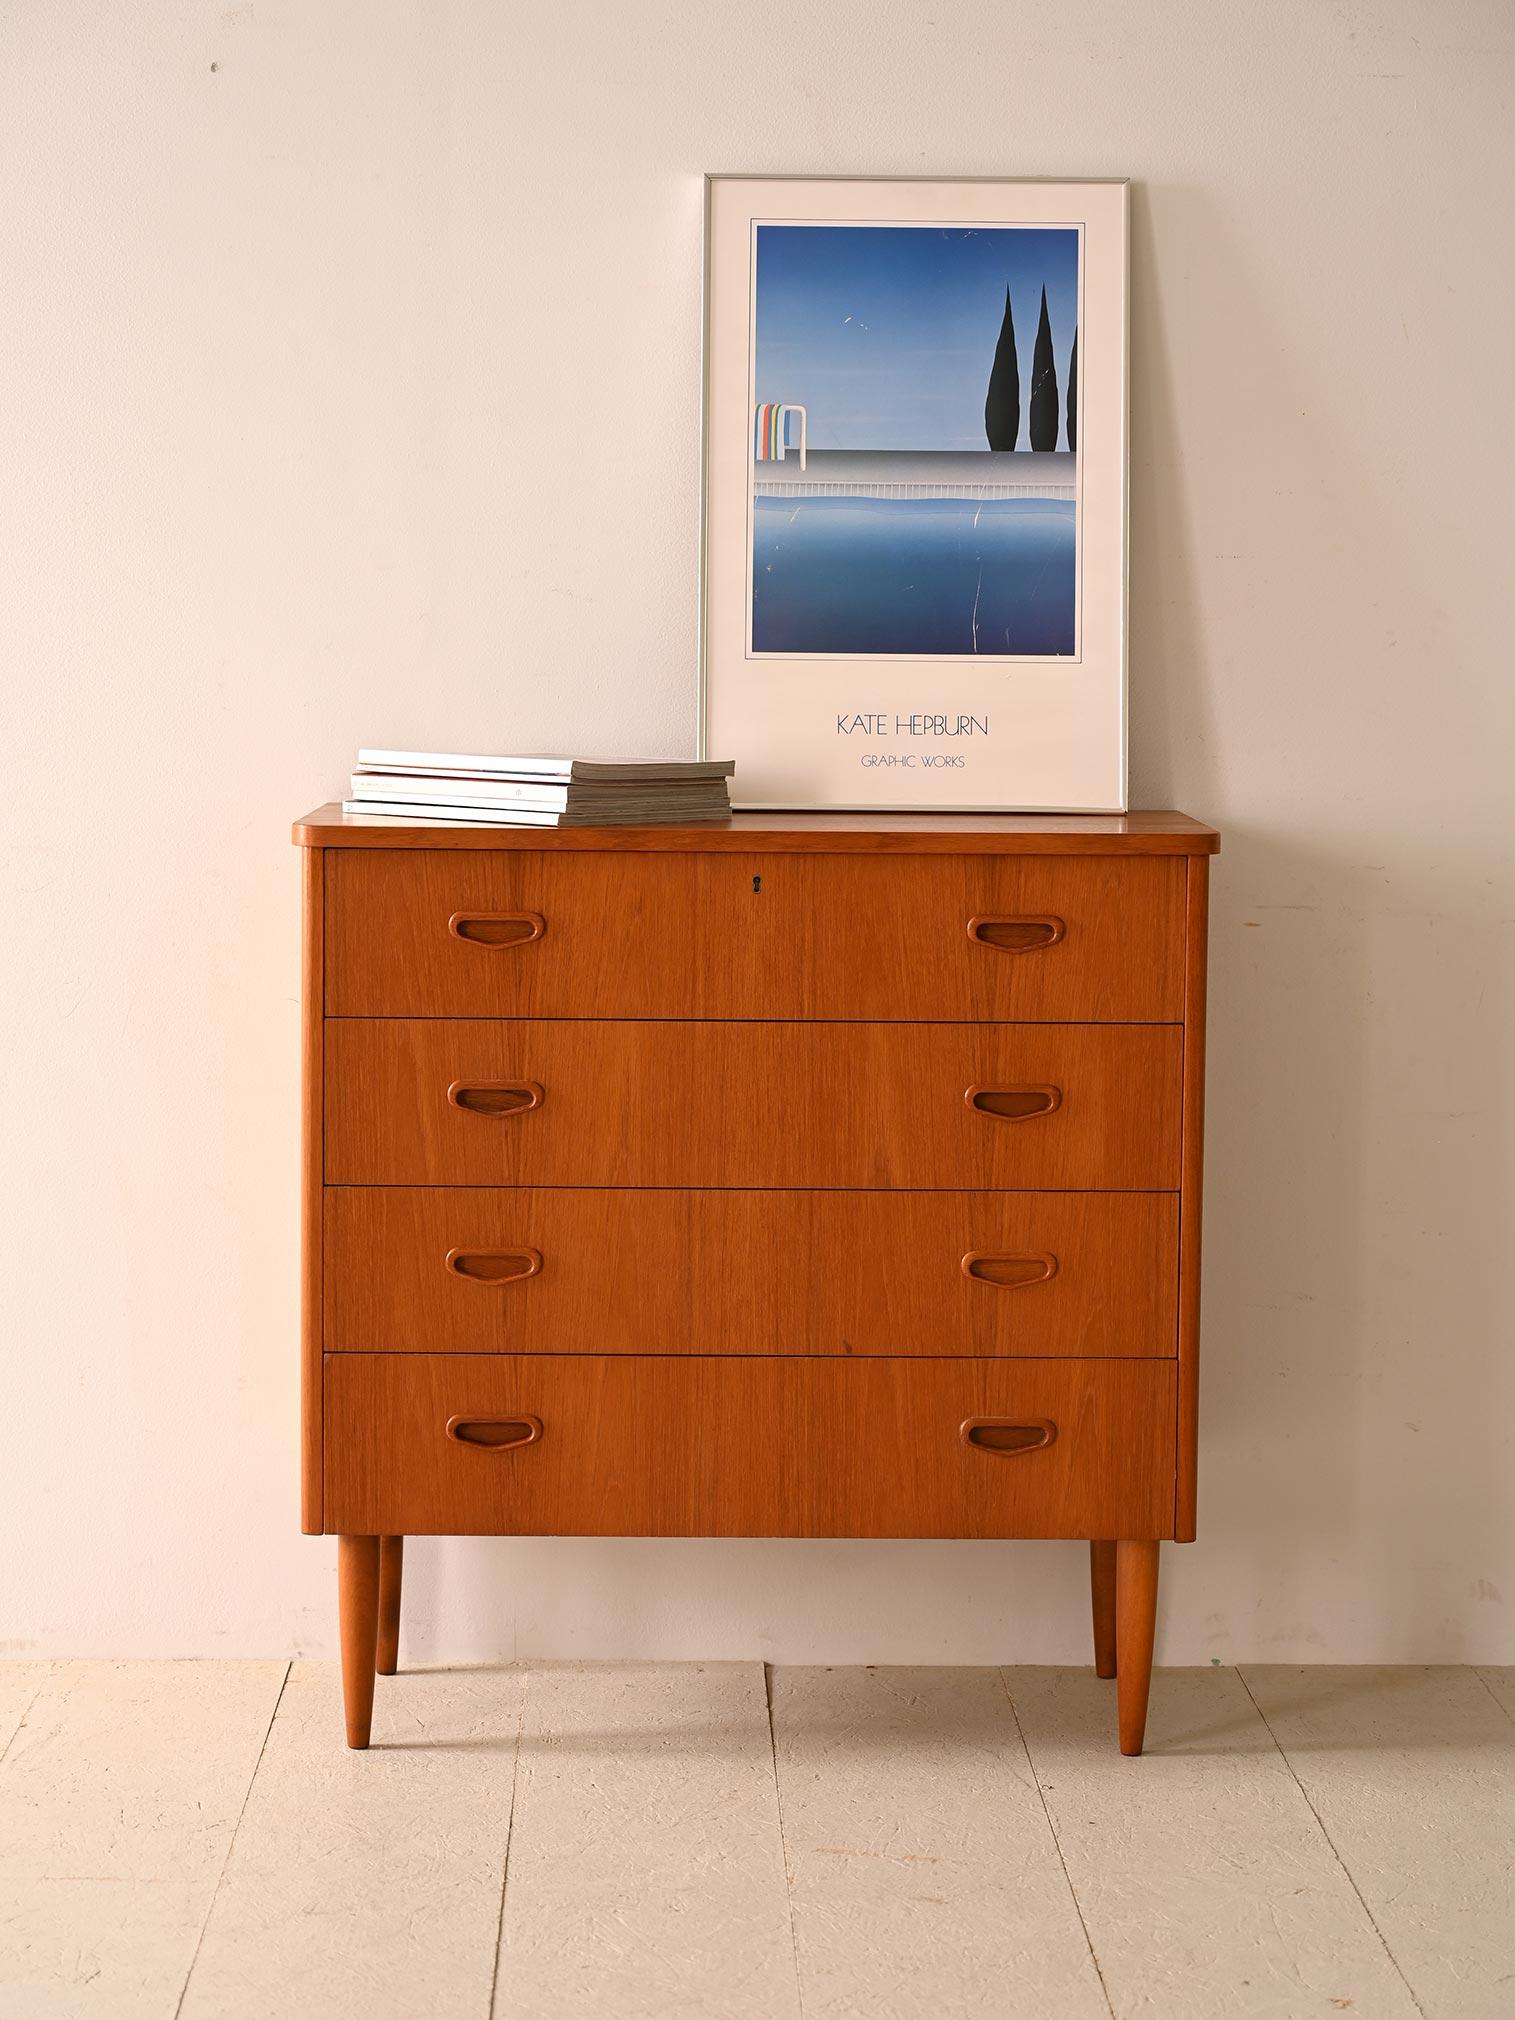 Cabinet with 4 drawers and lock.

A chest of drawers with lines typical of mid-century Scandinavian design. Wood-carved handles add artistic detail and a unique personal touch to each piece. Tapered legs lend subtle elegance and a light touch to the